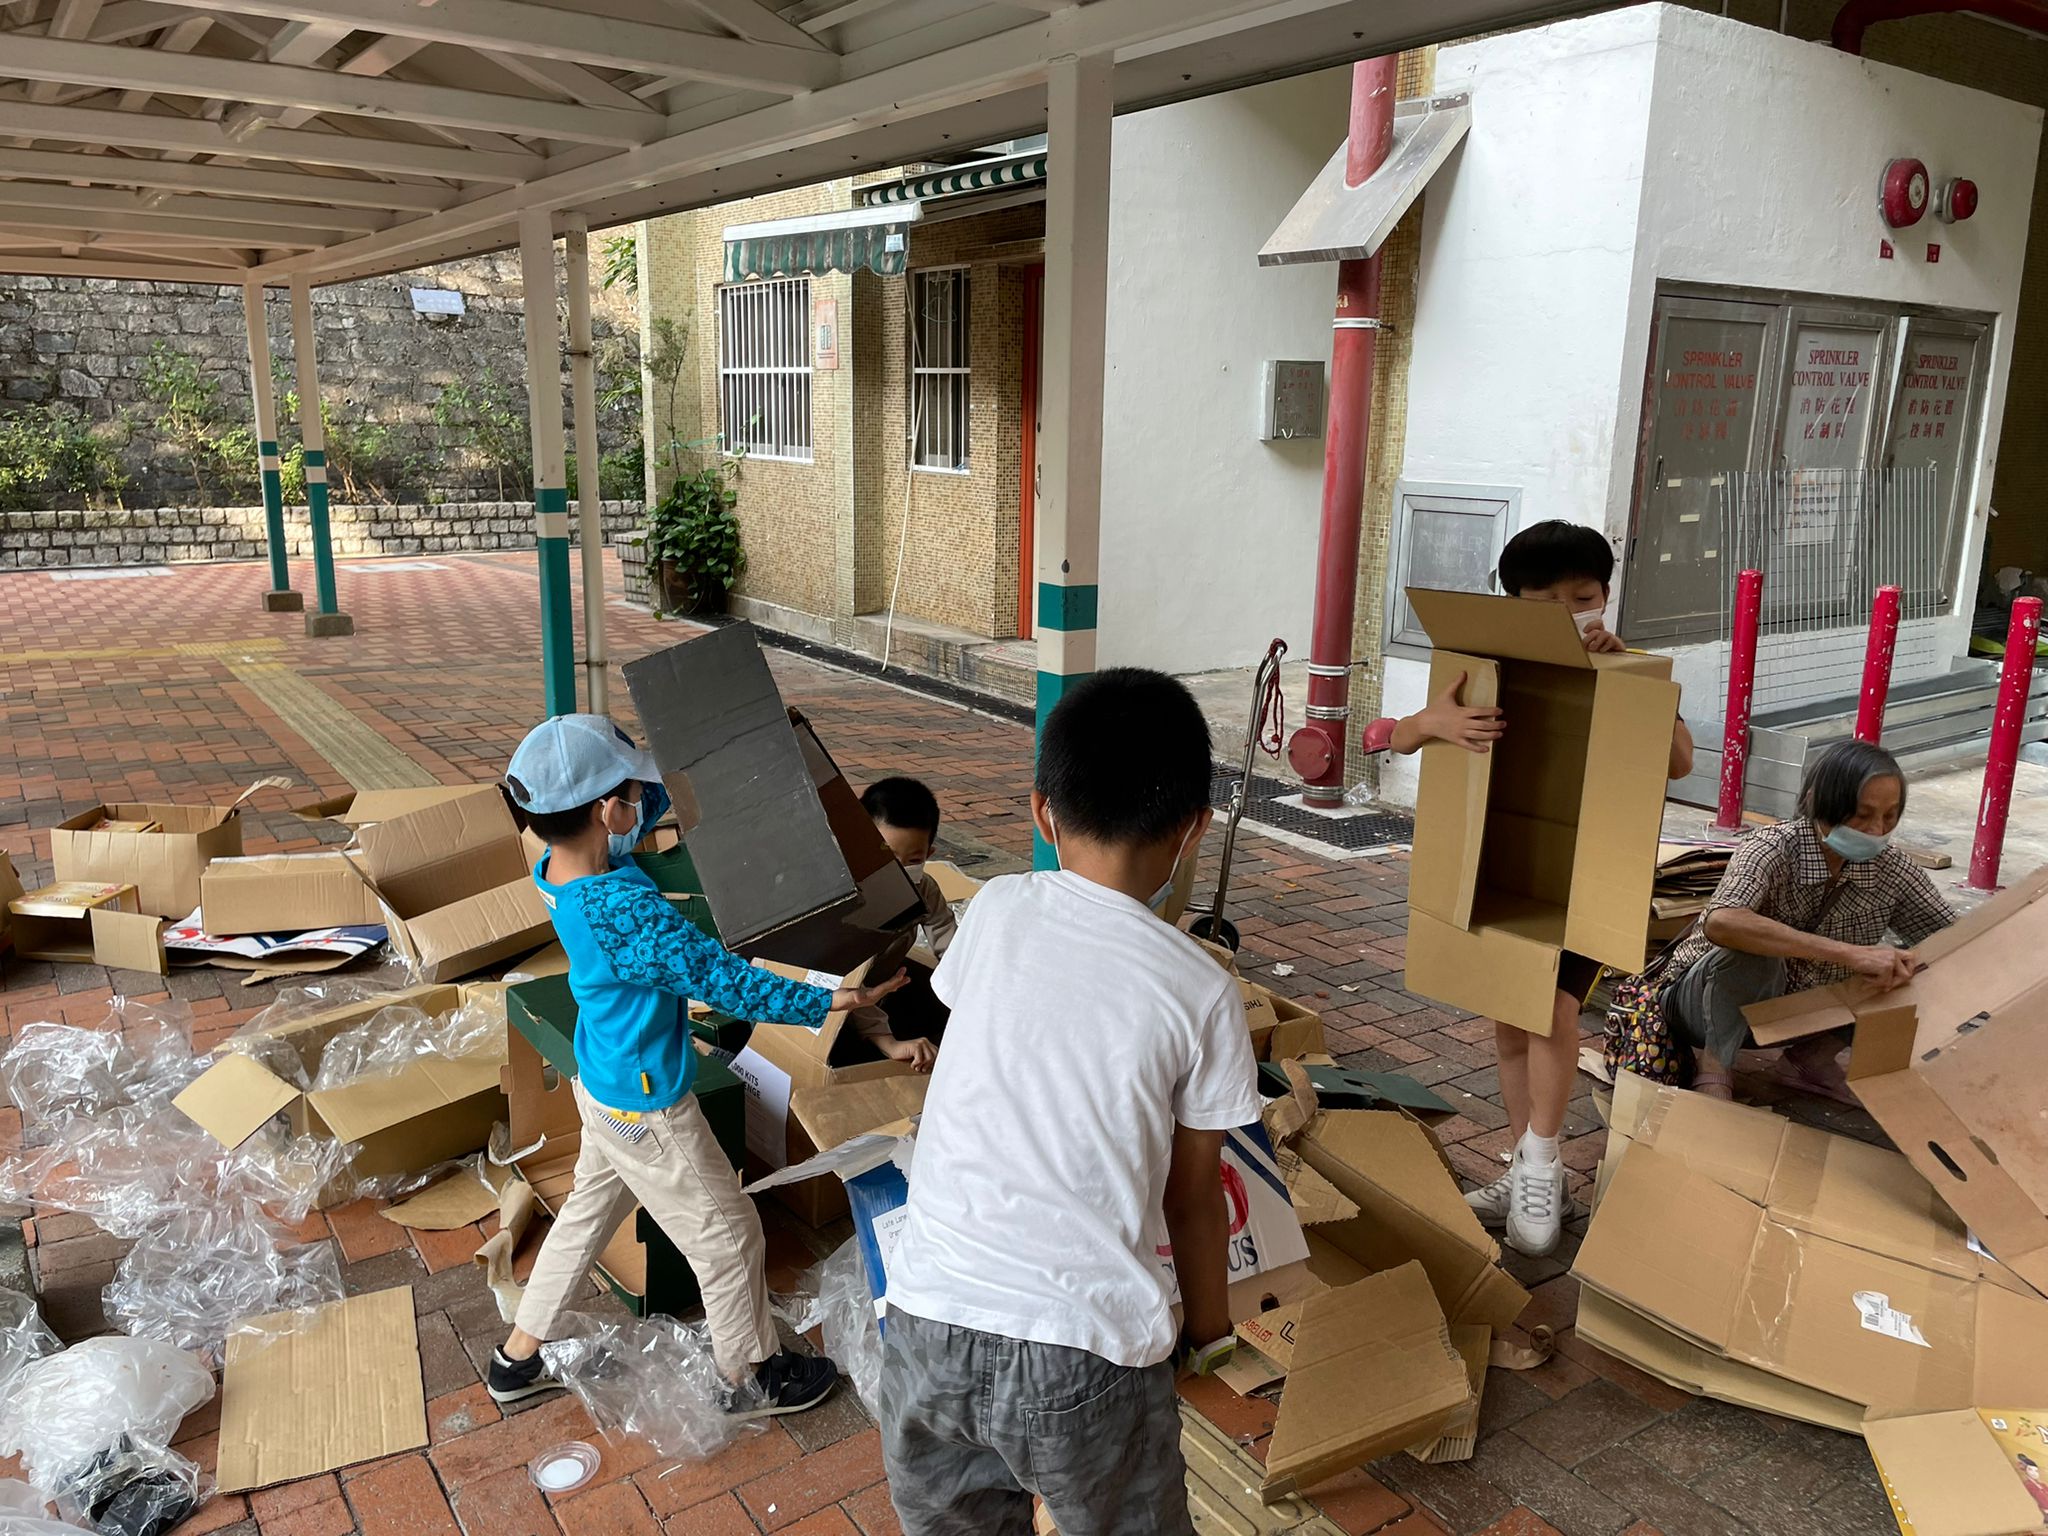 The kids were helping to clean up the boxes